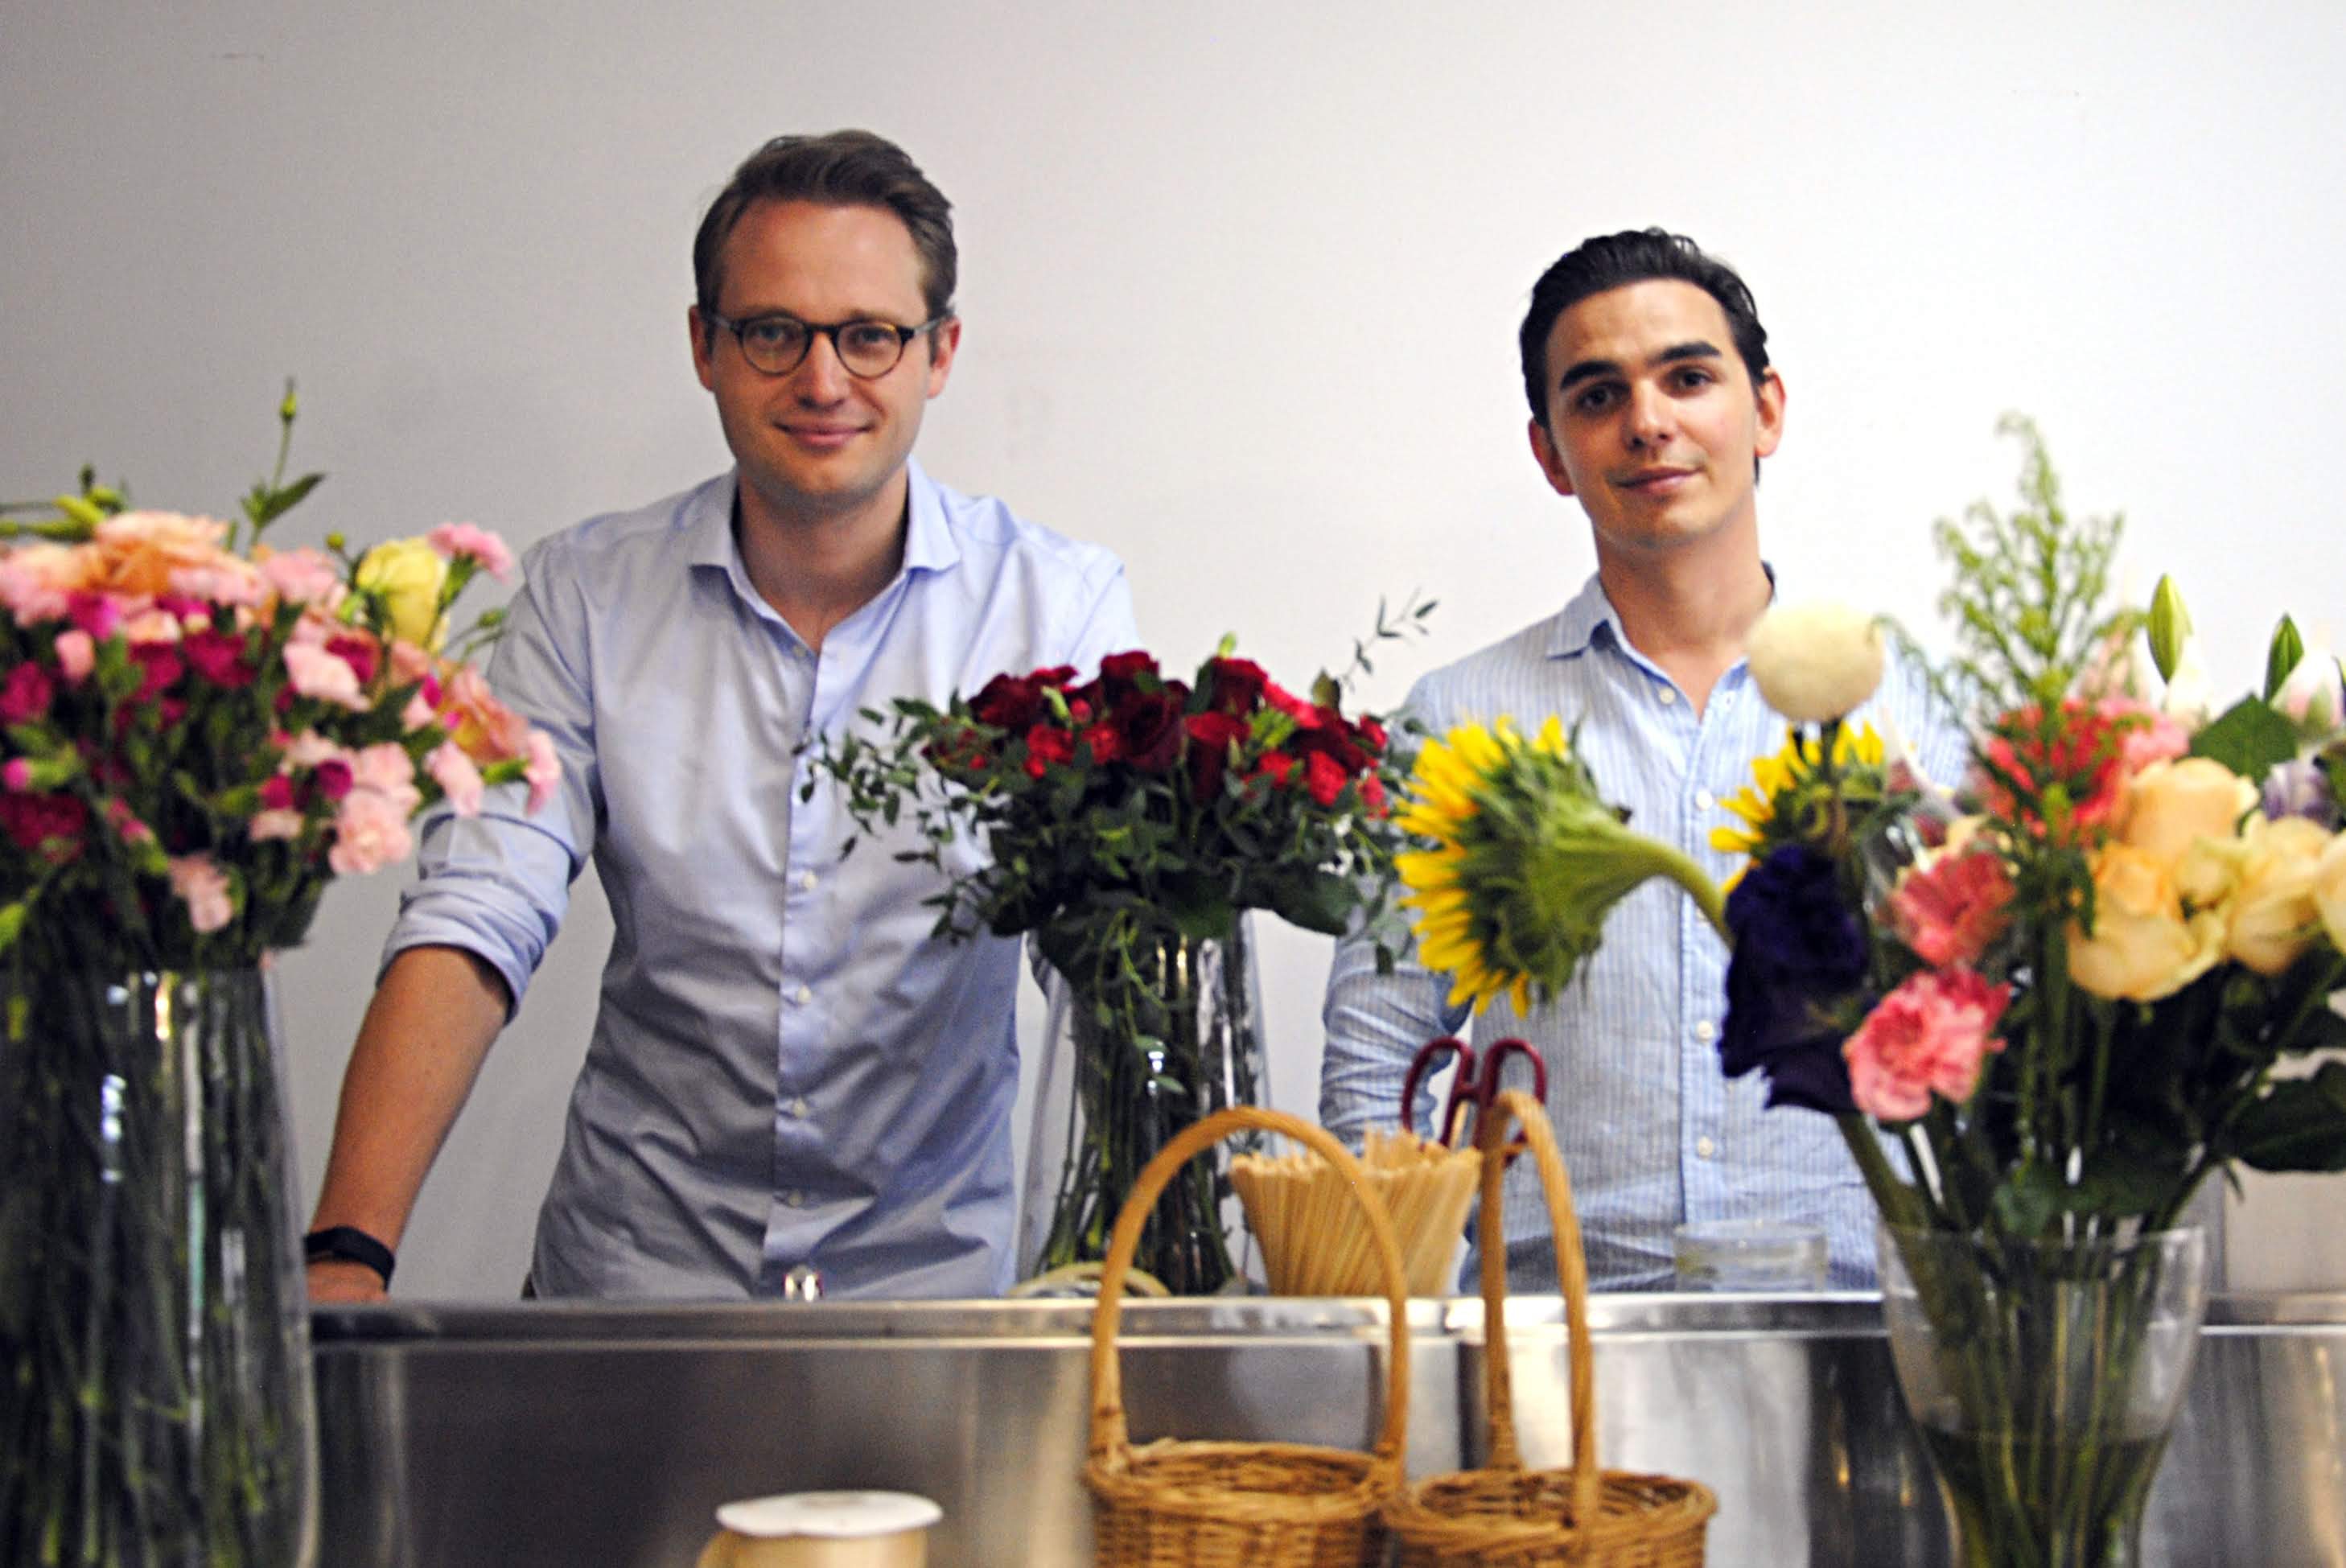 Malaysia: Online florist Flower Chimp bags $1.5m, to expand to Singapore soon